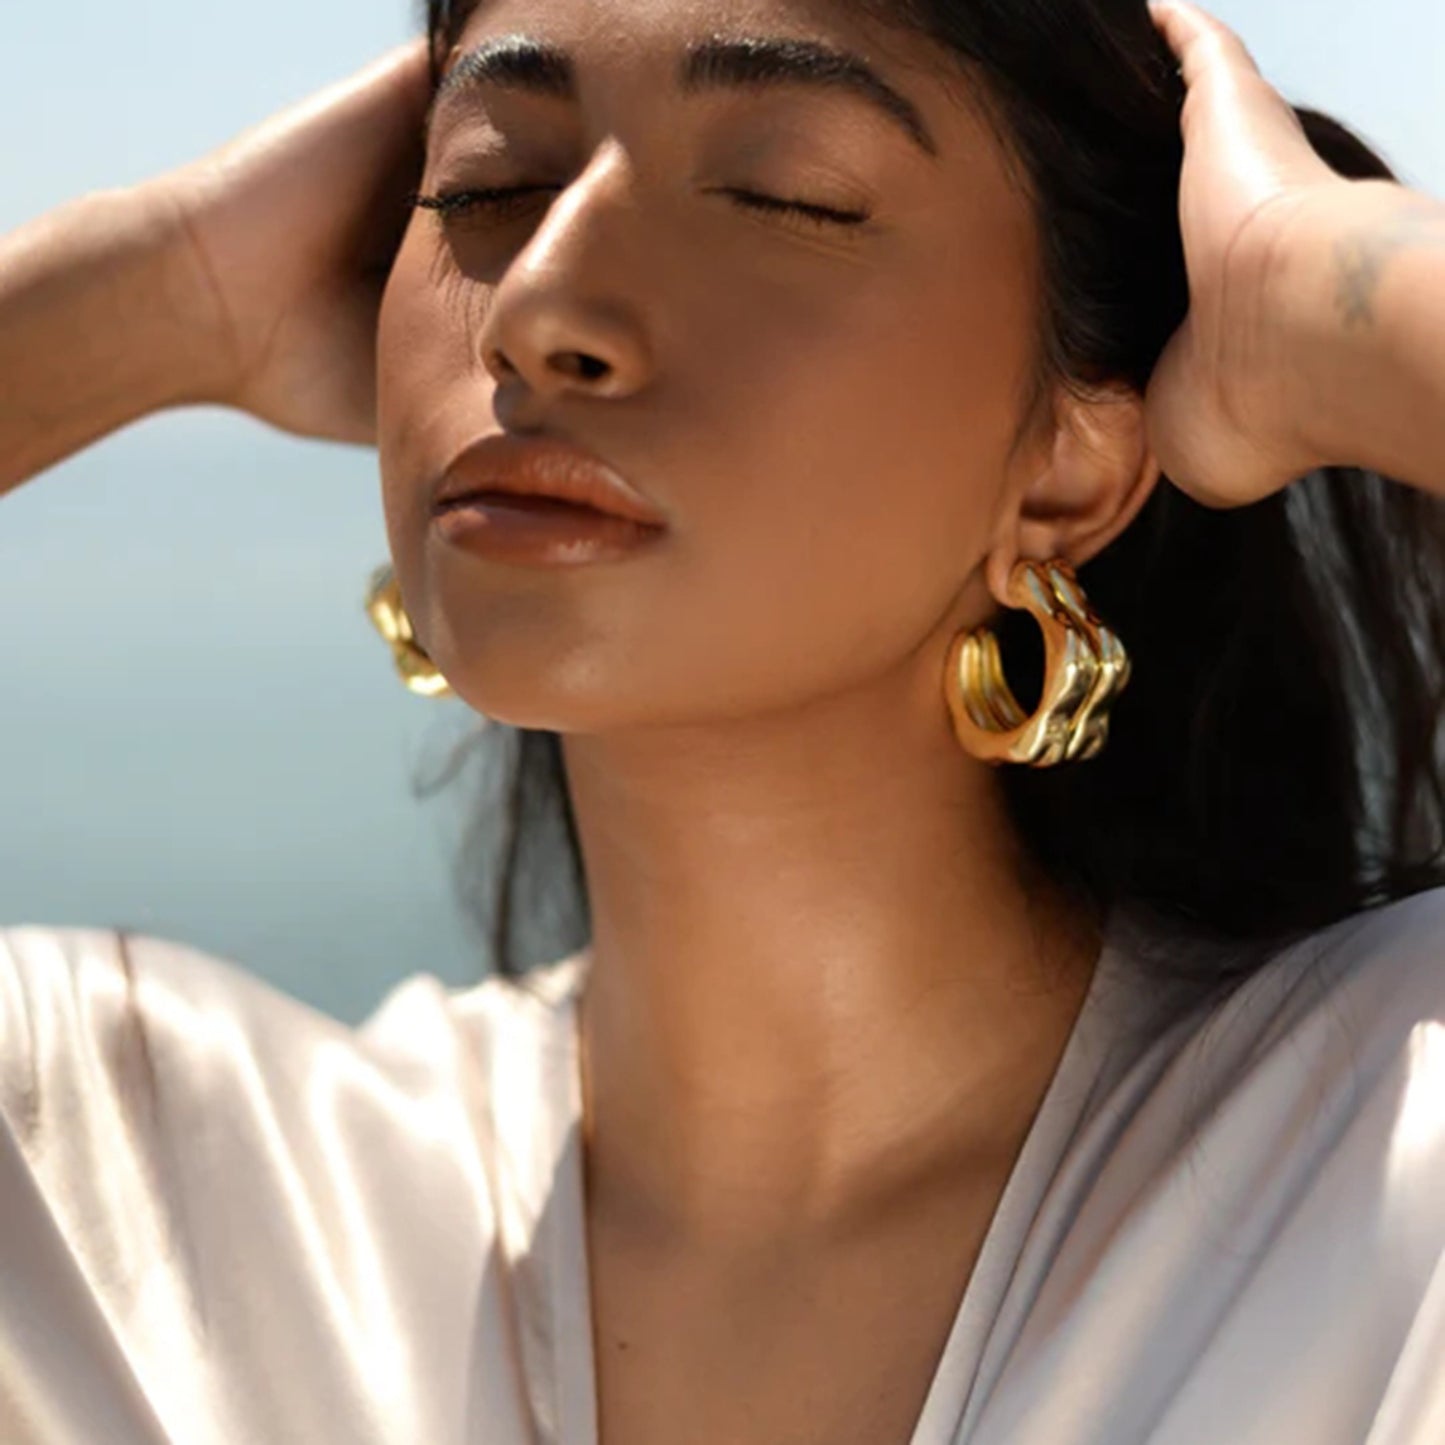 A woman with dark hair and closed eyes tilts her head back, hands touching her head. She wears large, sophisticated Stainless Steel C-Hoop Earrings from Marianela's Exclusive Shop, LLC and a silky light-colored top. The background is blurred, suggesting an outdoor setting, possibly near water.